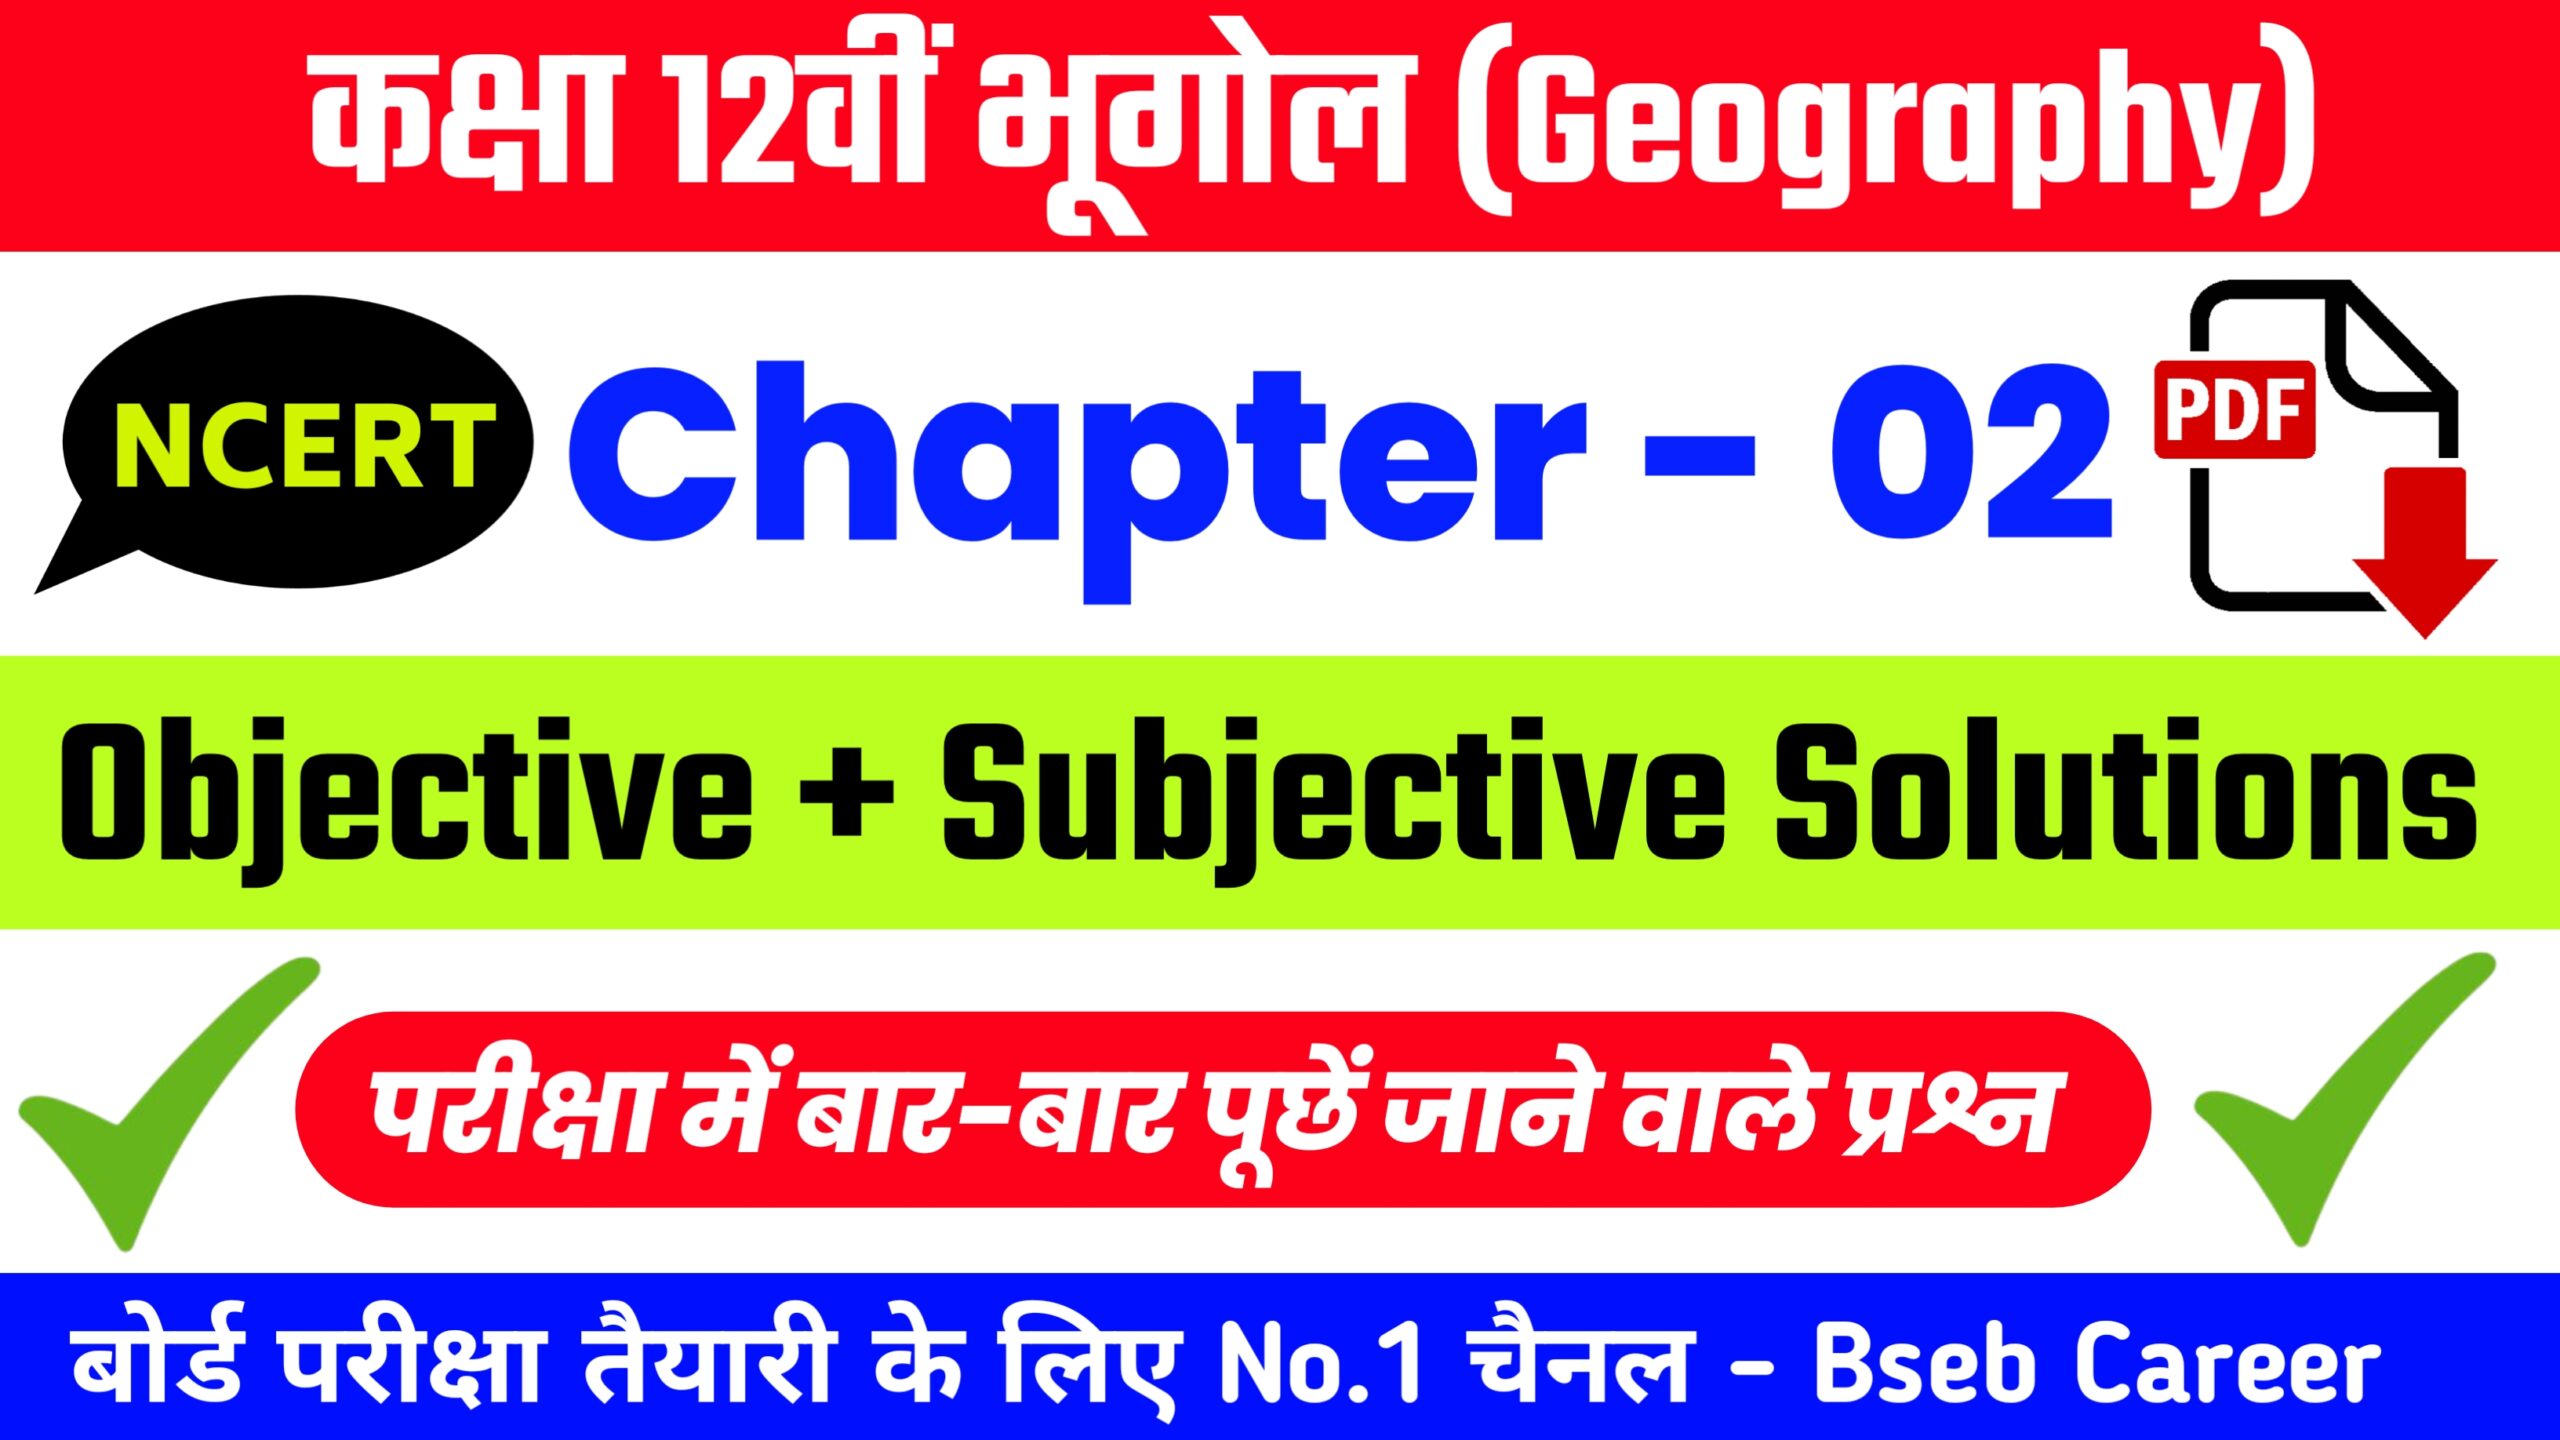 Class 12th Geography Chapter 2 Solutions In Hindi